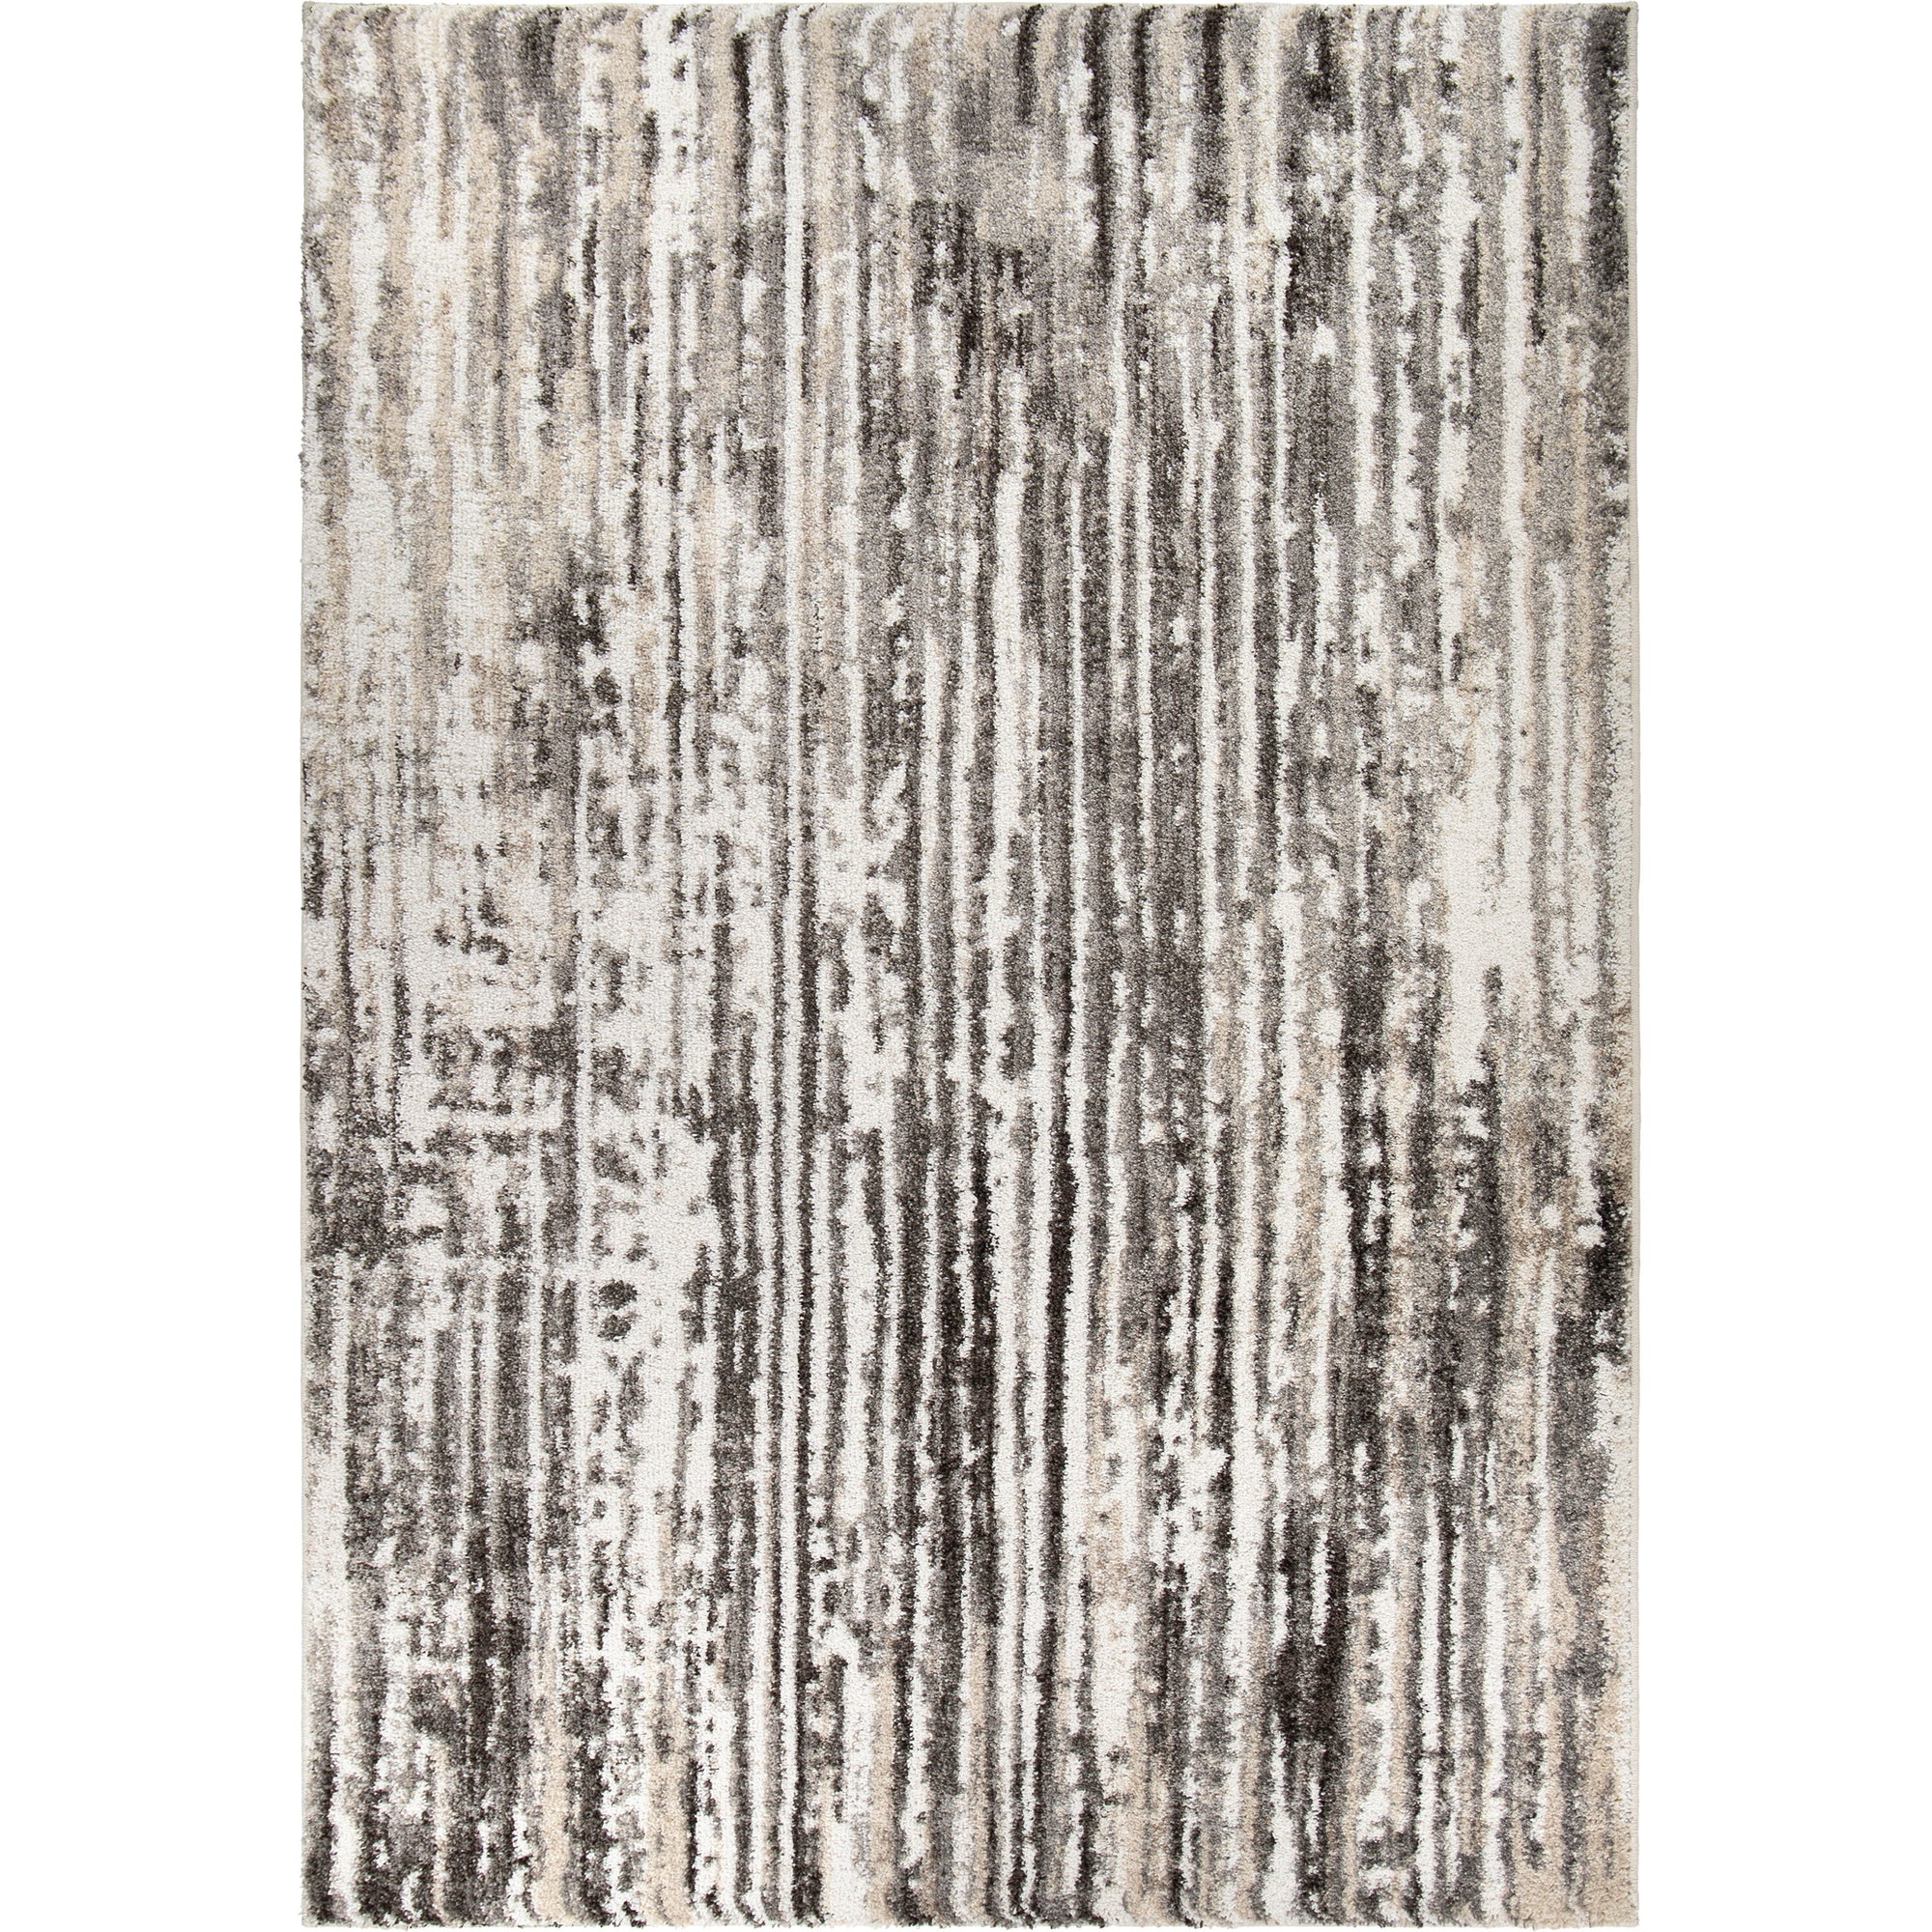 Palmetto Living Mystical Birchtree   Natural Area Rug - 7'10" x 10'10"